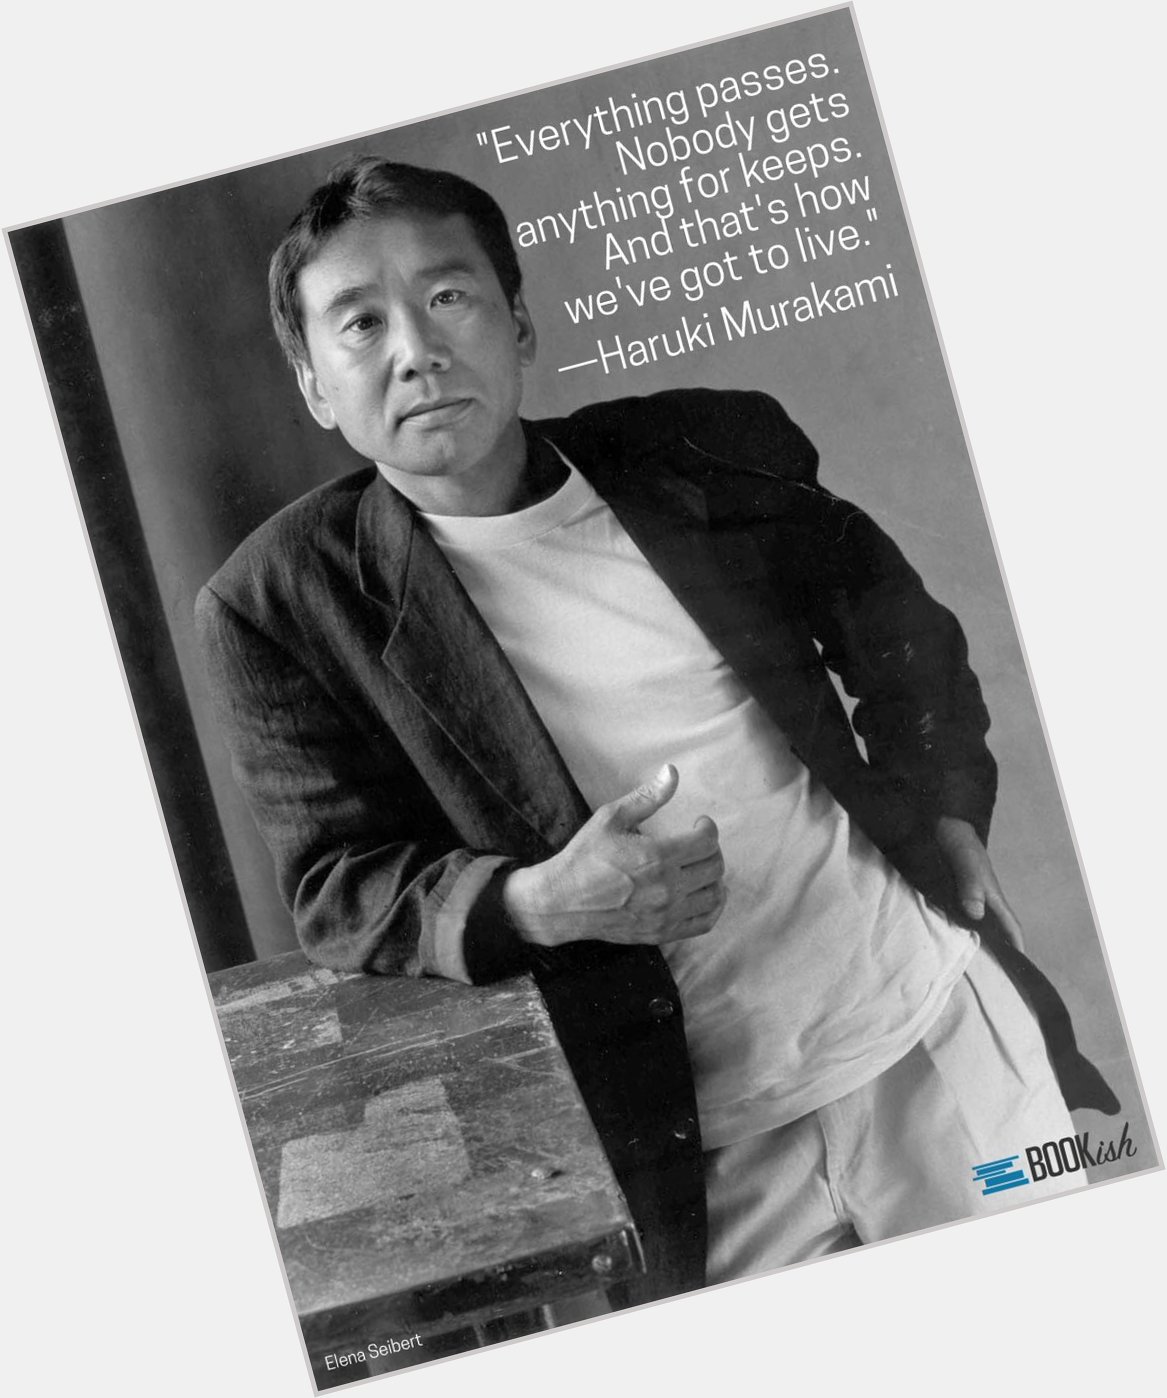 Wishing Haruki Murakami a happy birthday today! Which books of his are your favorites?  